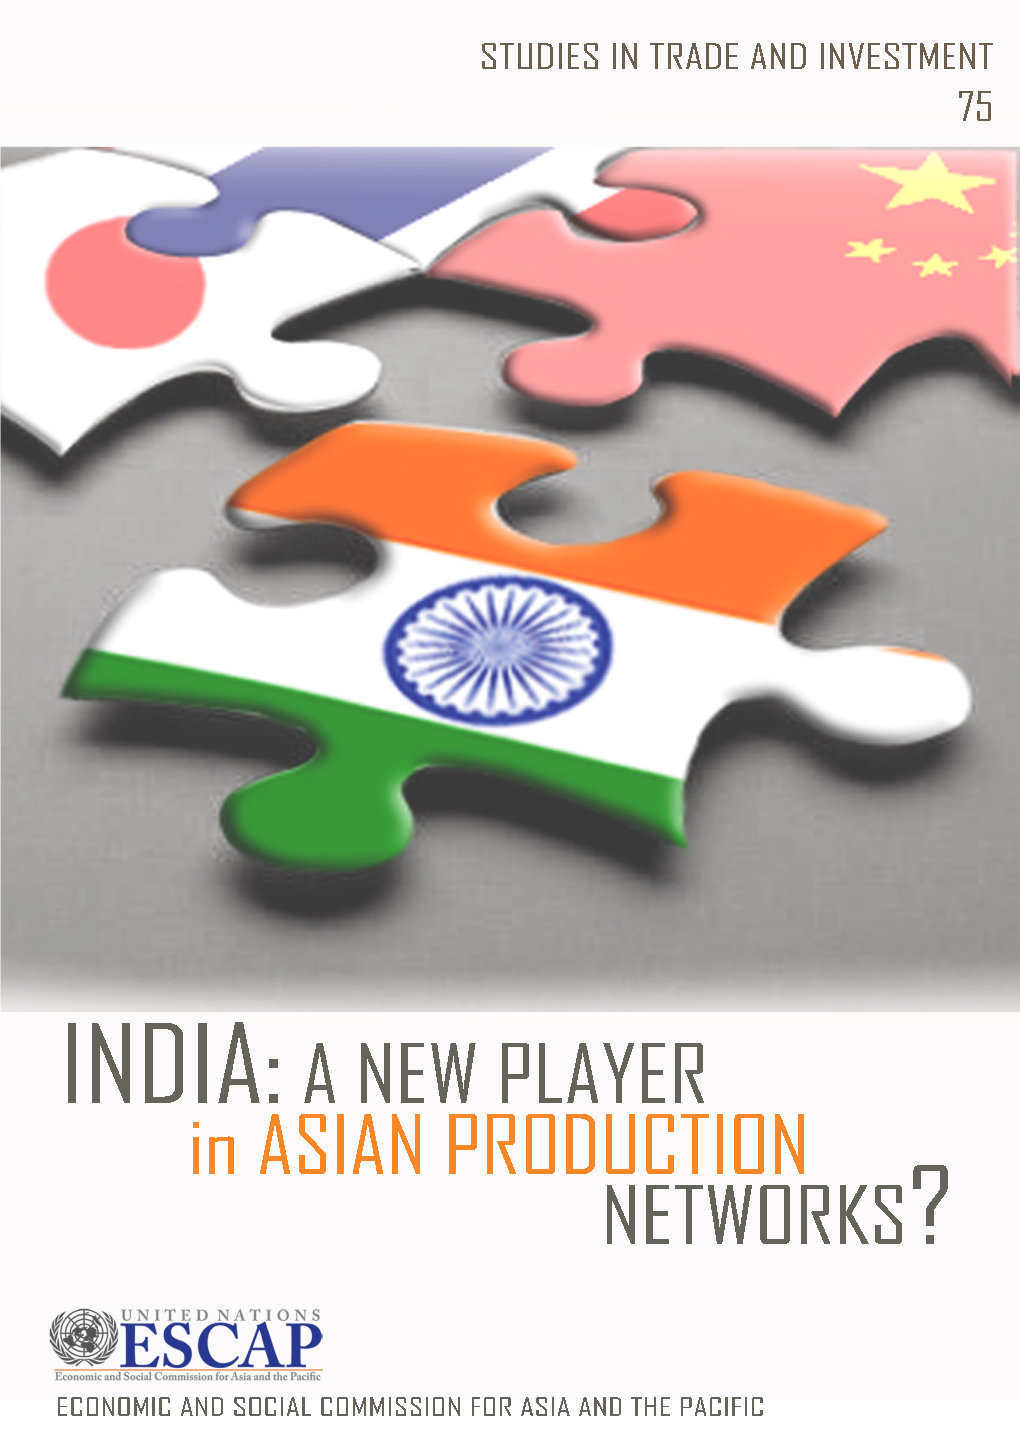 INDIA: a NEW PLAYER in ASIAN PRODUCTION NETWORKS?